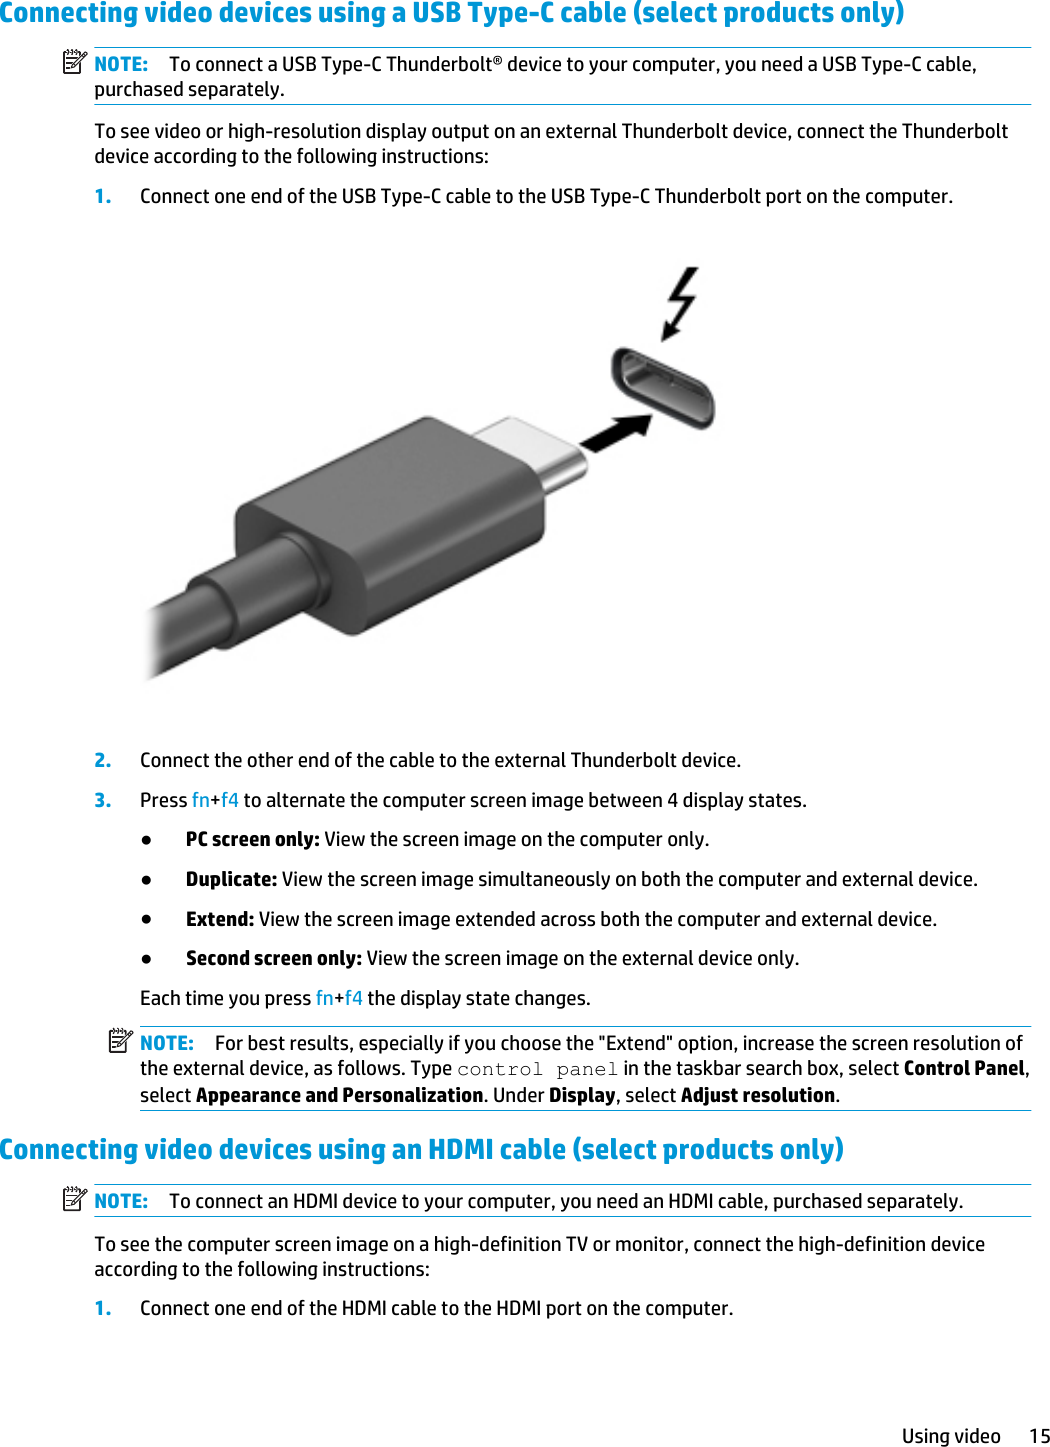 Connecting video devices using a USB Type-C cable (select products only)NOTE: To connect a USB Type-C Thunderbolt® device to your computer, you need a USB Type-C cable, purchased separately.To see video or high-resolution display output on an external Thunderbolt device, connect the Thunderbolt device according to the following instructions:1. Connect one end of the USB Type-C cable to the USB Type-C Thunderbolt port on the computer.2. Connect the other end of the cable to the external Thunderbolt device.3. Press fn+f4 to alternate the computer screen image between 4 display states.●PC screen only: View the screen image on the computer only.●Duplicate: View the screen image simultaneously on both the computer and external device.●Extend: View the screen image extended across both the computer and external device.●Second screen only: View the screen image on the external device only.Each time you press fn+f4 the display state changes.NOTE: For best results, especially if you choose the &quot;Extend&quot; option, increase the screen resolution of the external device, as follows. Type control panel in the taskbar search box, select Control Panel, select Appearance and Personalization. Under Display, select Adjust resolution.Connecting video devices using an HDMI cable (select products only)NOTE: To connect an HDMI device to your computer, you need an HDMI cable, purchased separately.To see the computer screen image on a high-definition TV or monitor, connect the high-definition device according to the following instructions:1. Connect one end of the HDMI cable to the HDMI port on the computer.Using video 15